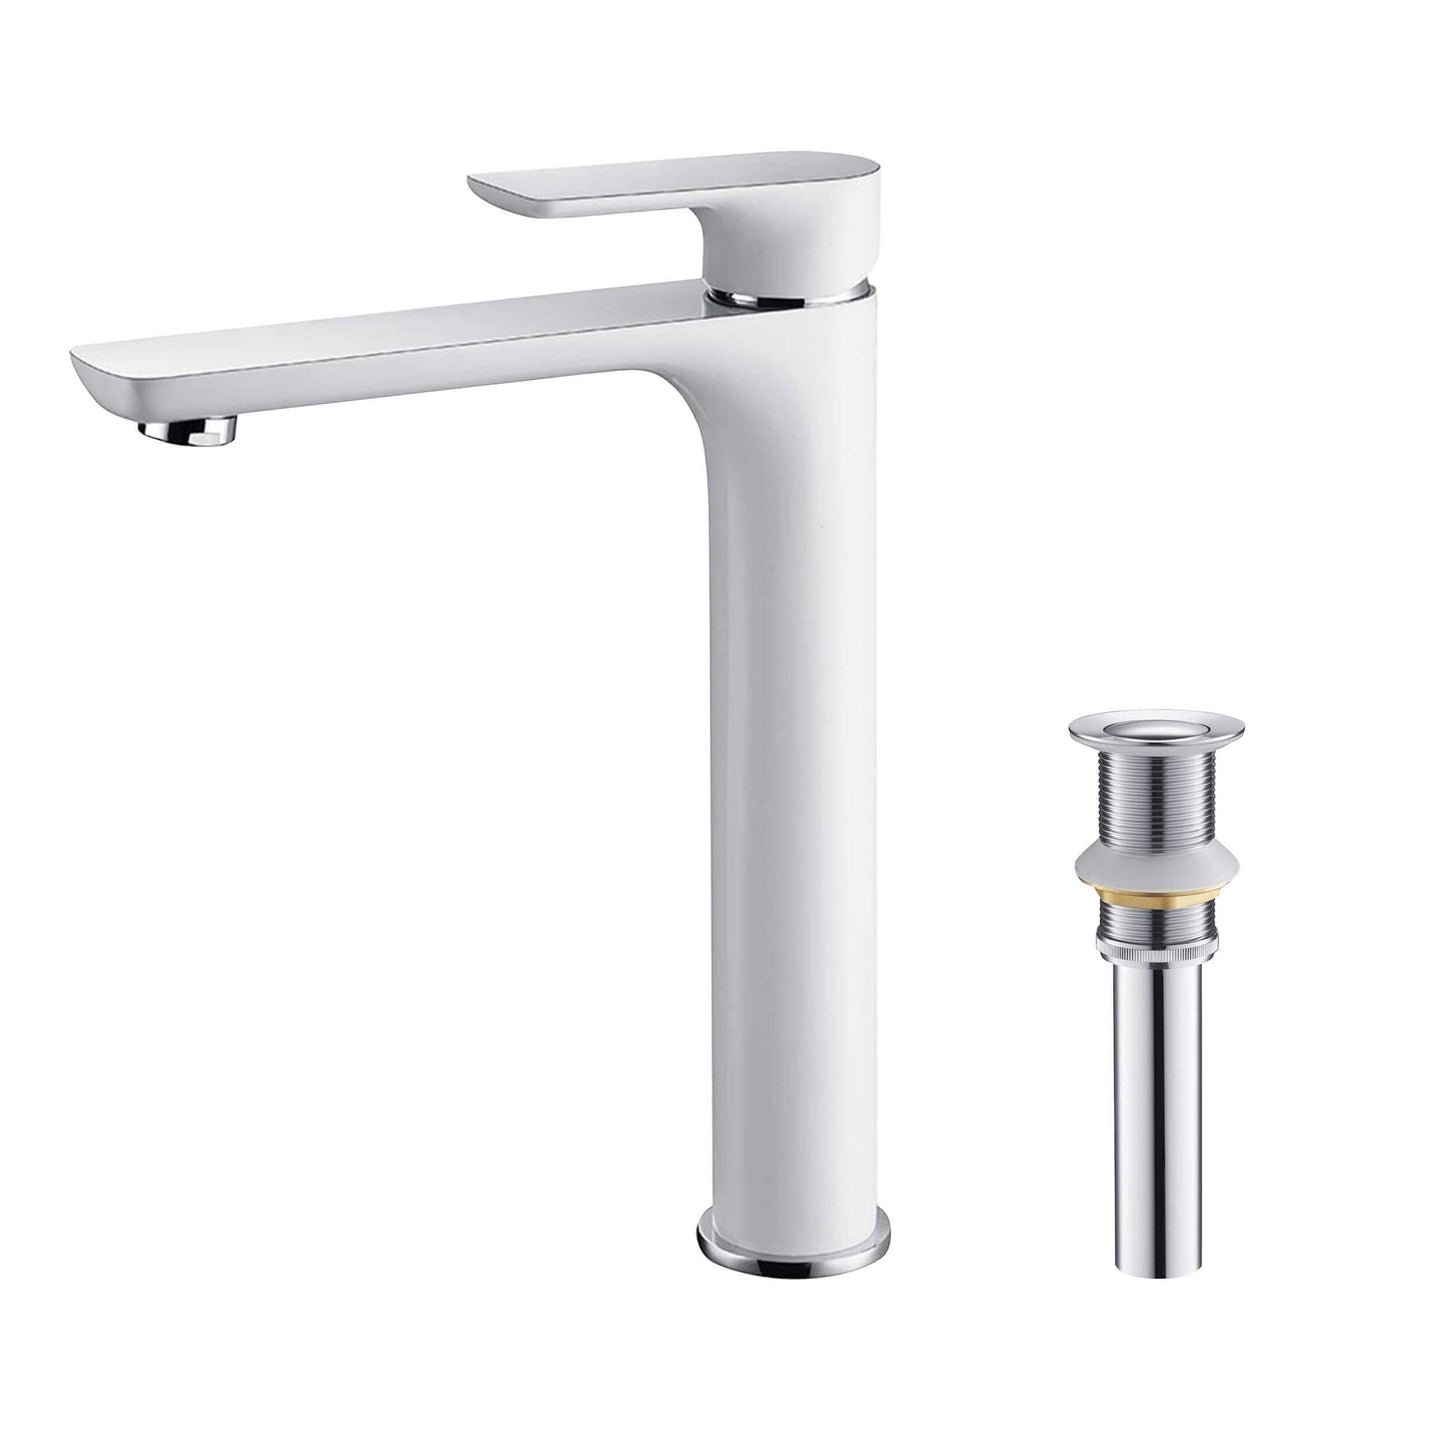 KIBI Tender-T Single Handle White Solid Brass Bathroom Vessel Sink Faucet With Chrome Pop-Up Drain Stopper Small Cover Without Overflow